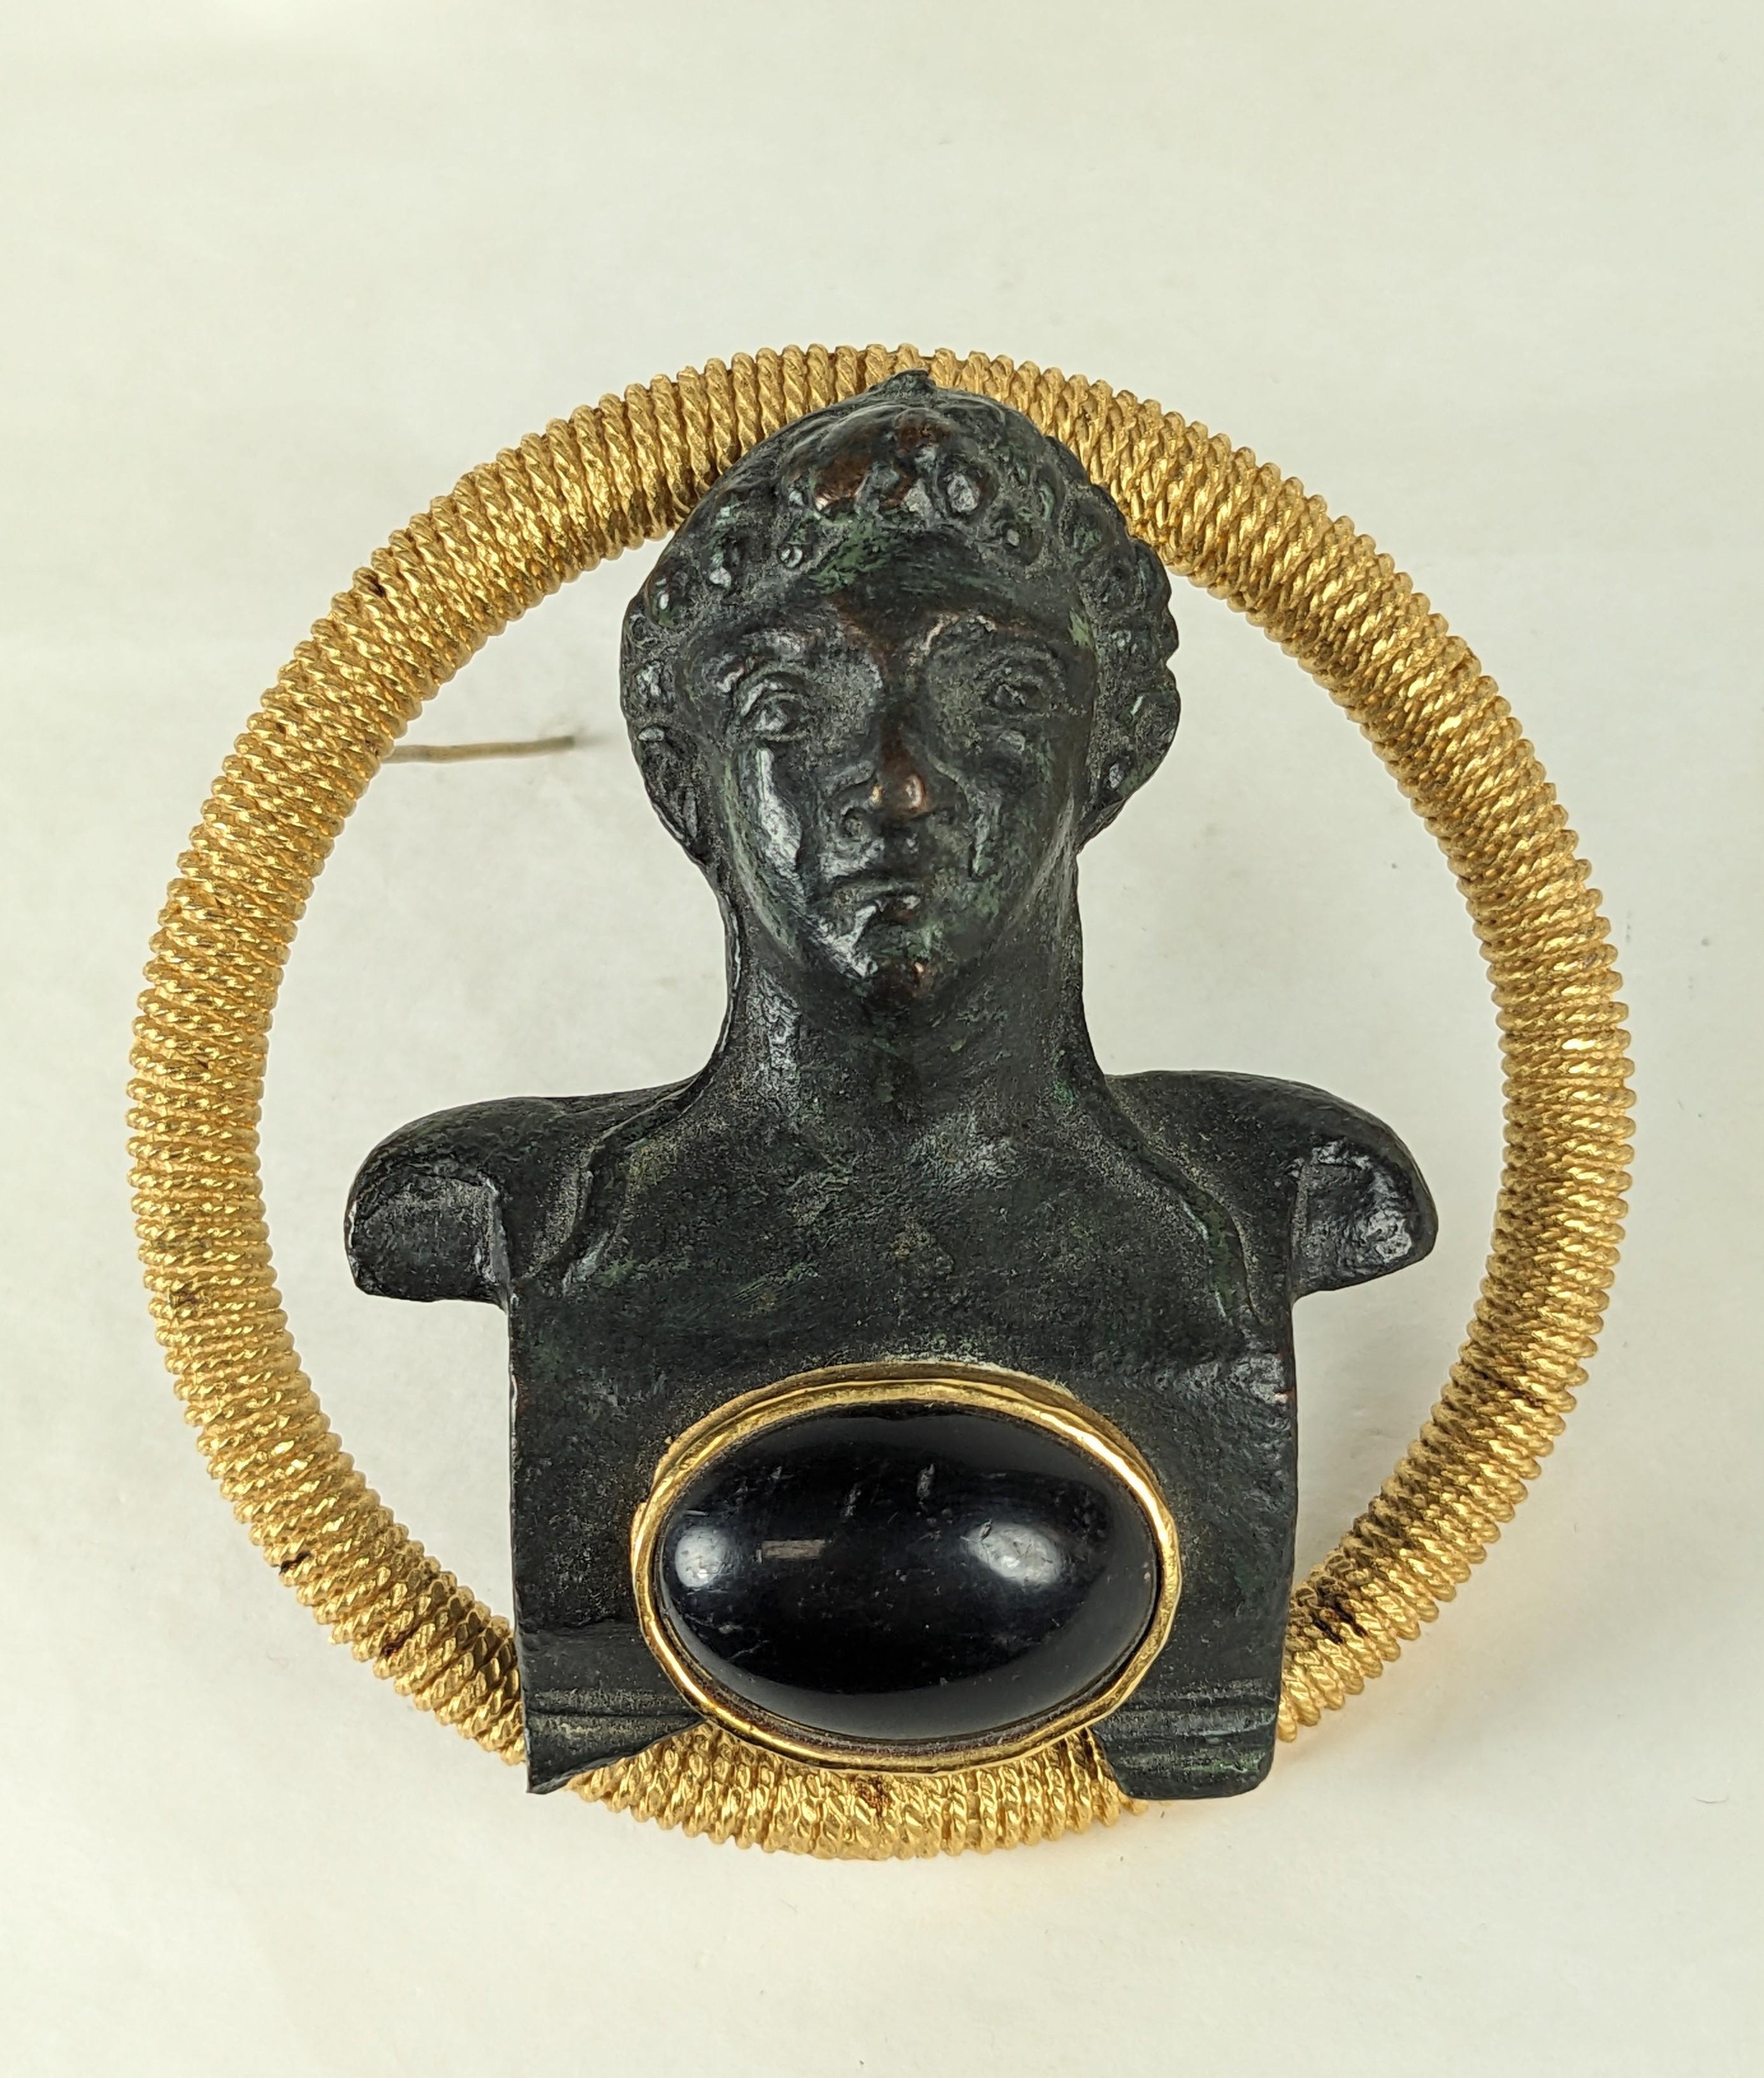 Collectible and Rare Trifari by Diane Love Archealogical Revivalist Brooch from the 1970's. Diane Love created a line of Artisan jewels based on Ancient and Historical forms in the 60's and 70's. 
The design is based on a 1st Century Bronze bust of